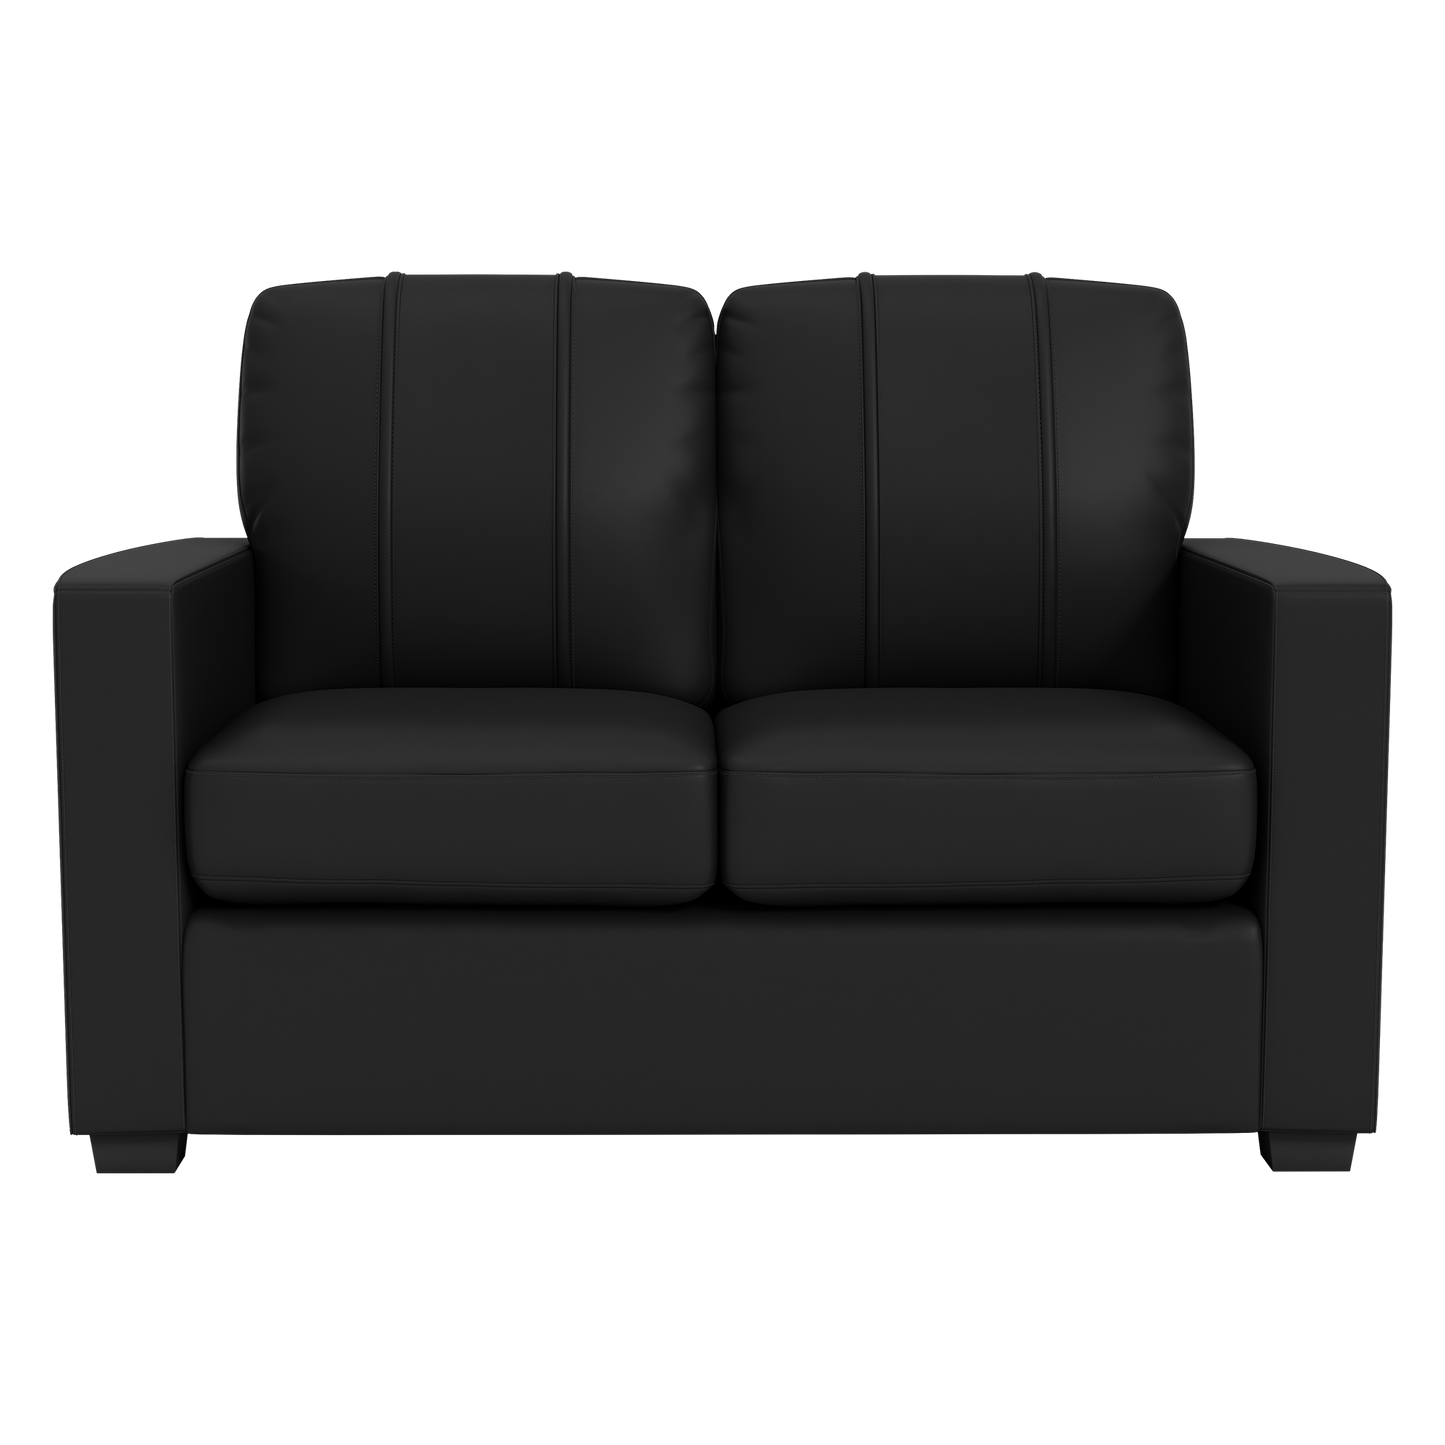 Silver Loveseat with  Detroit Lions Secondary Logo